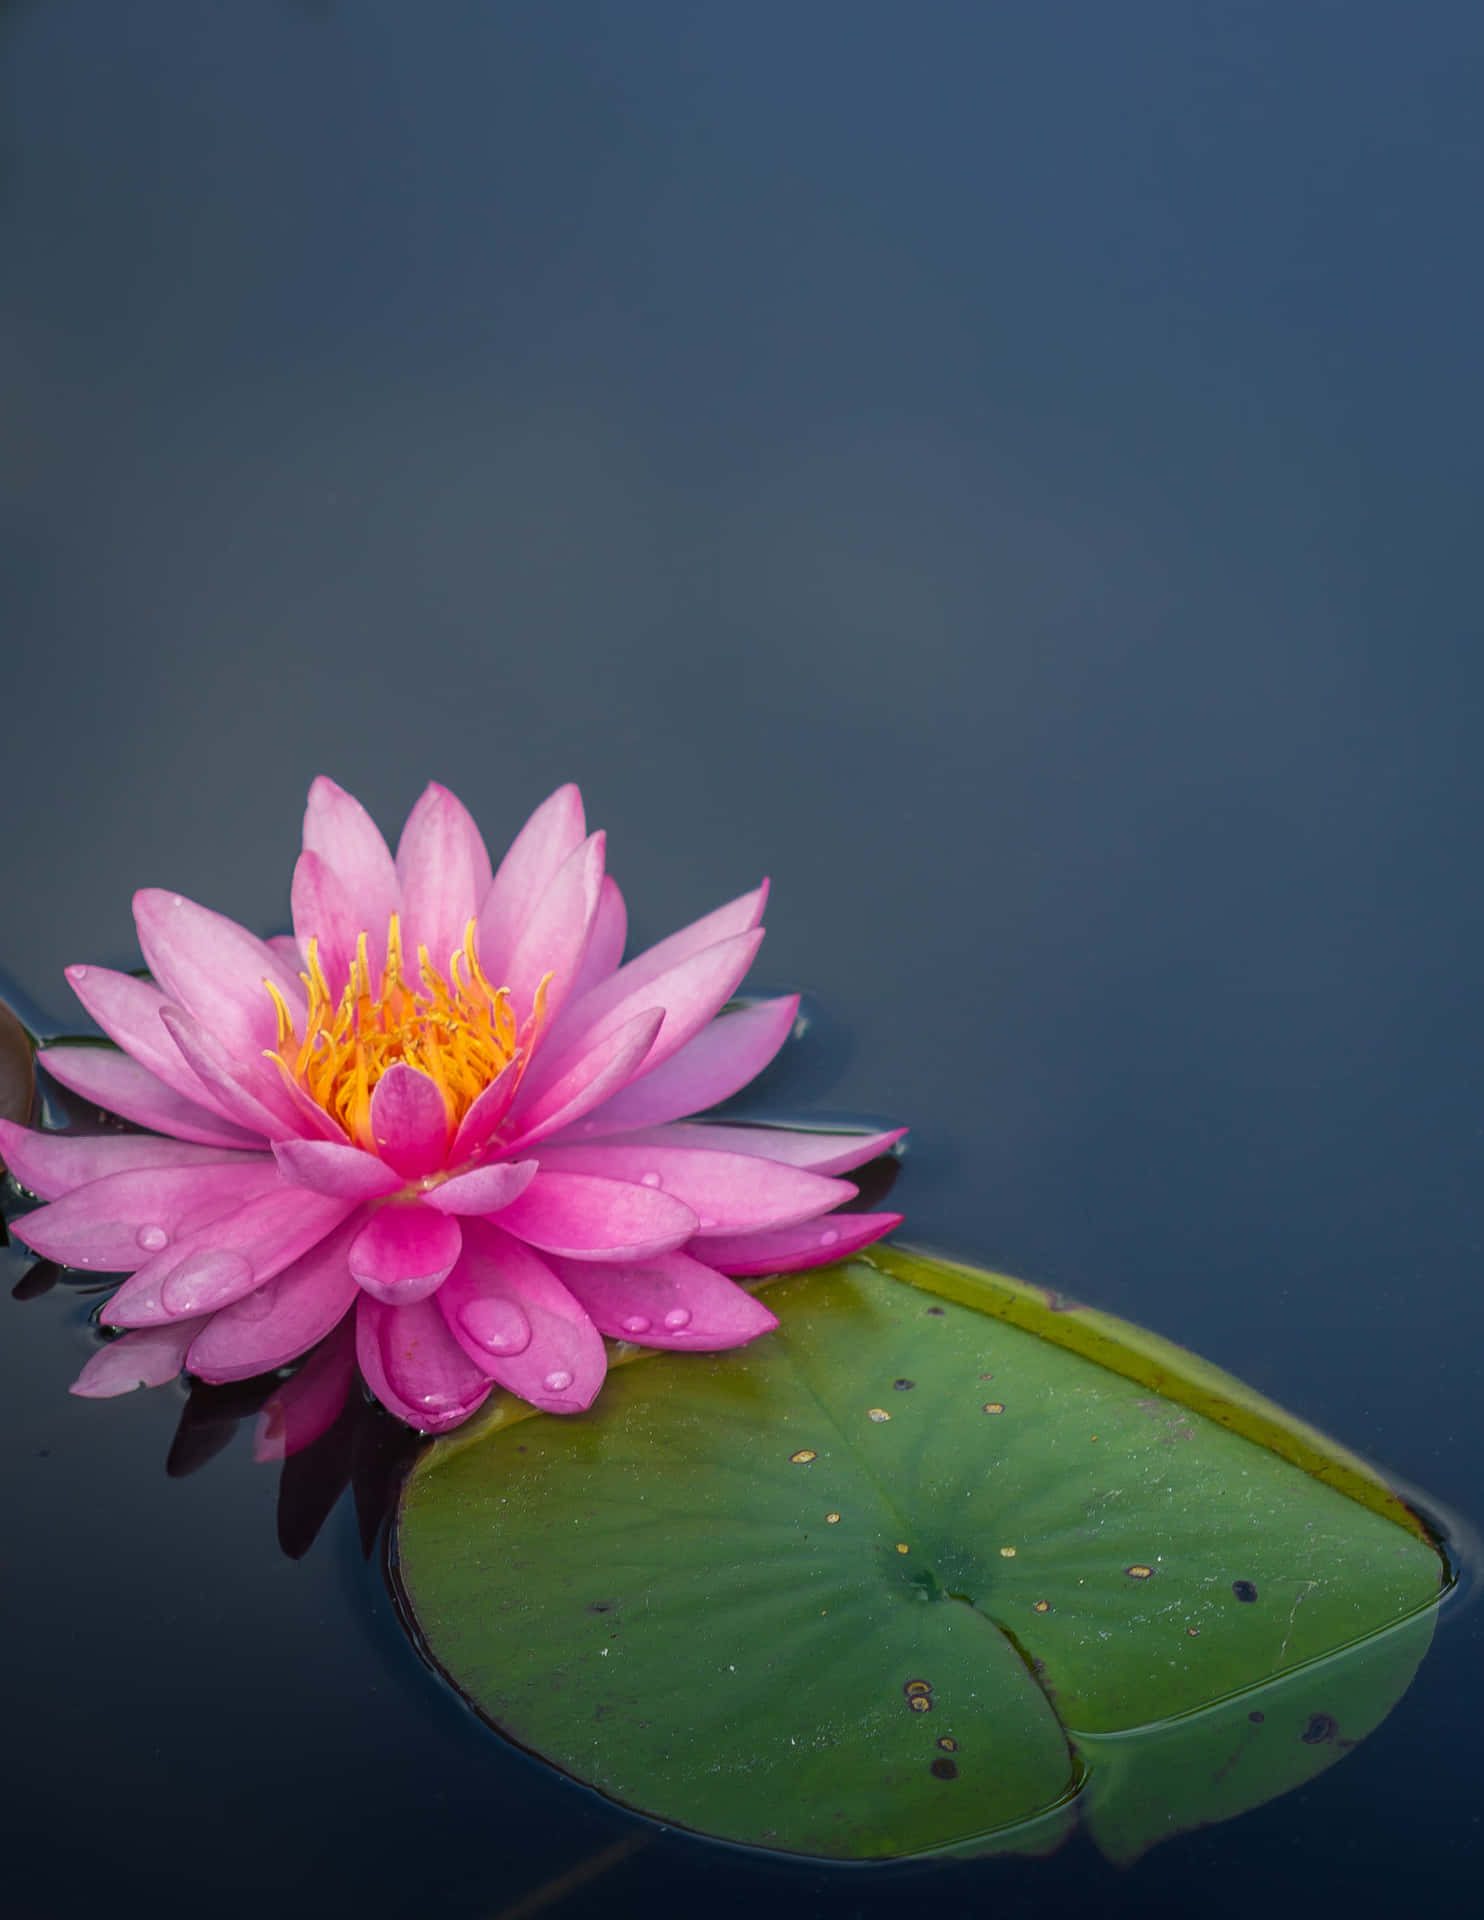 "The Charm and Beauty of a Lotus Flower"